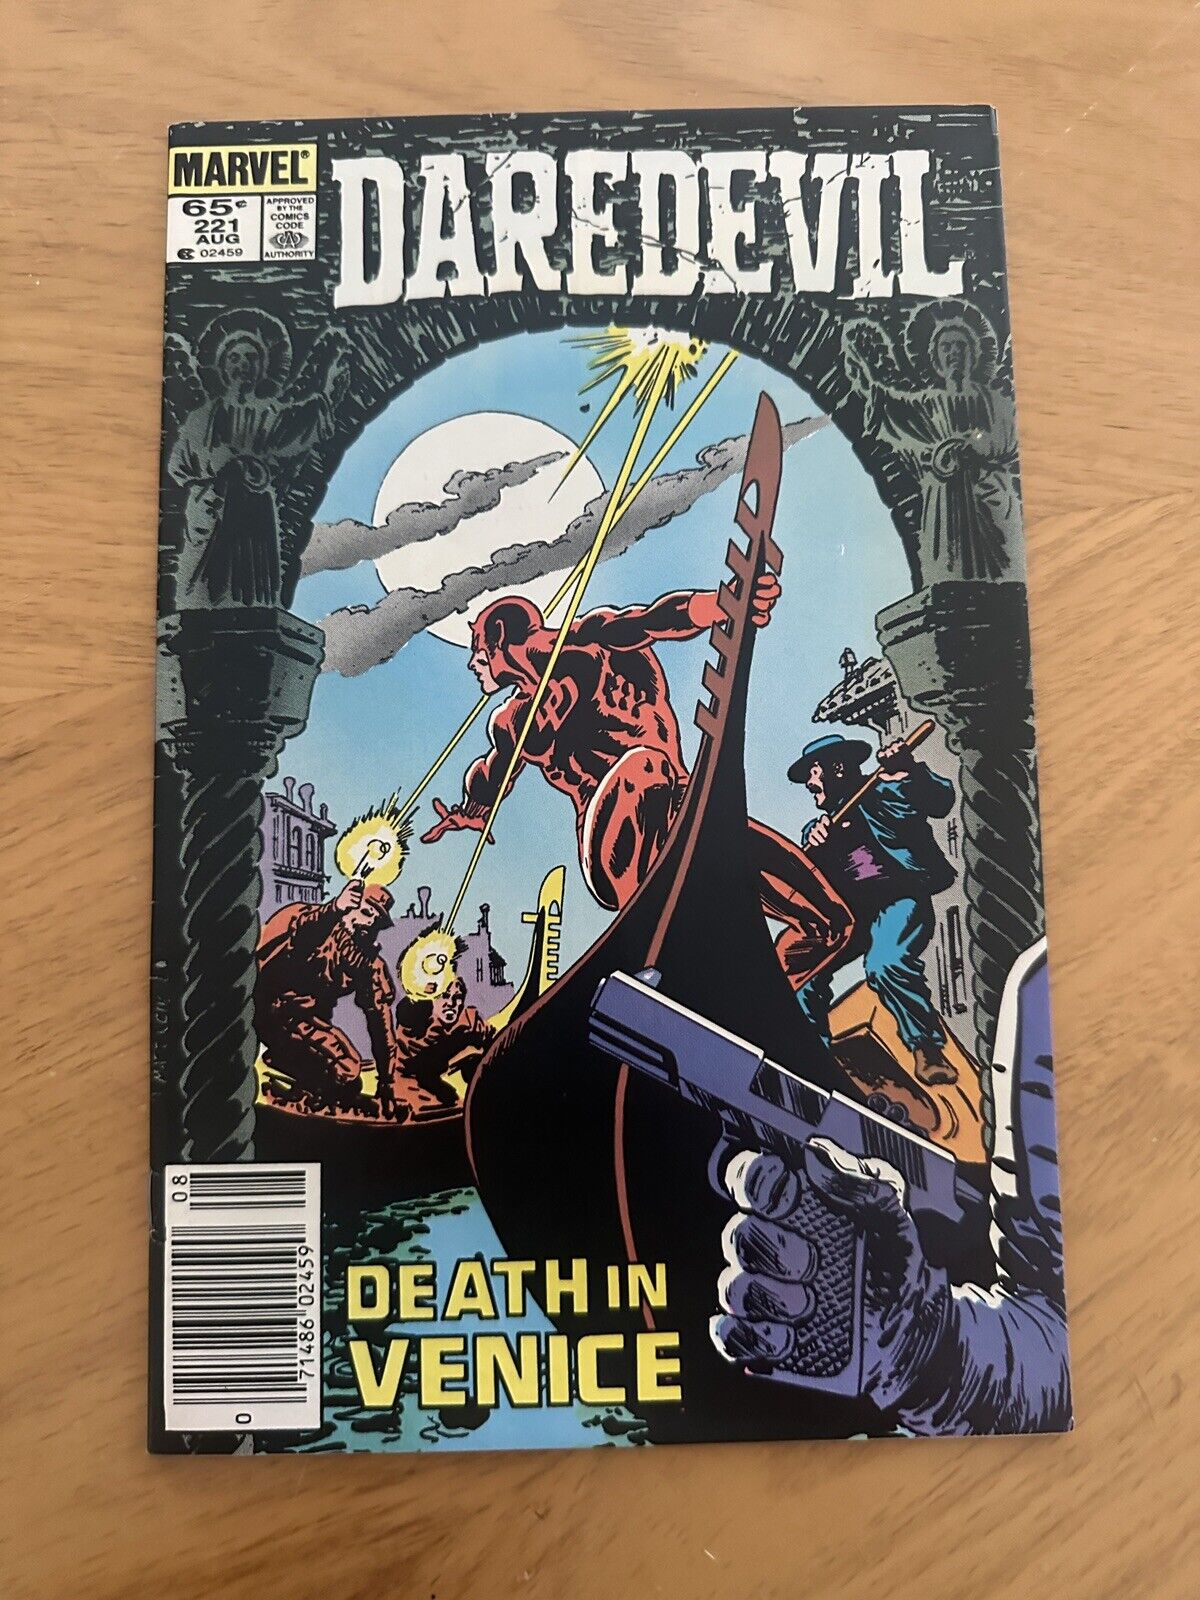 Daredevil #221-RARE-NEVER READ OR OPENED-AUGUST 1985-CLEAN SPINE-WHITE PAGES